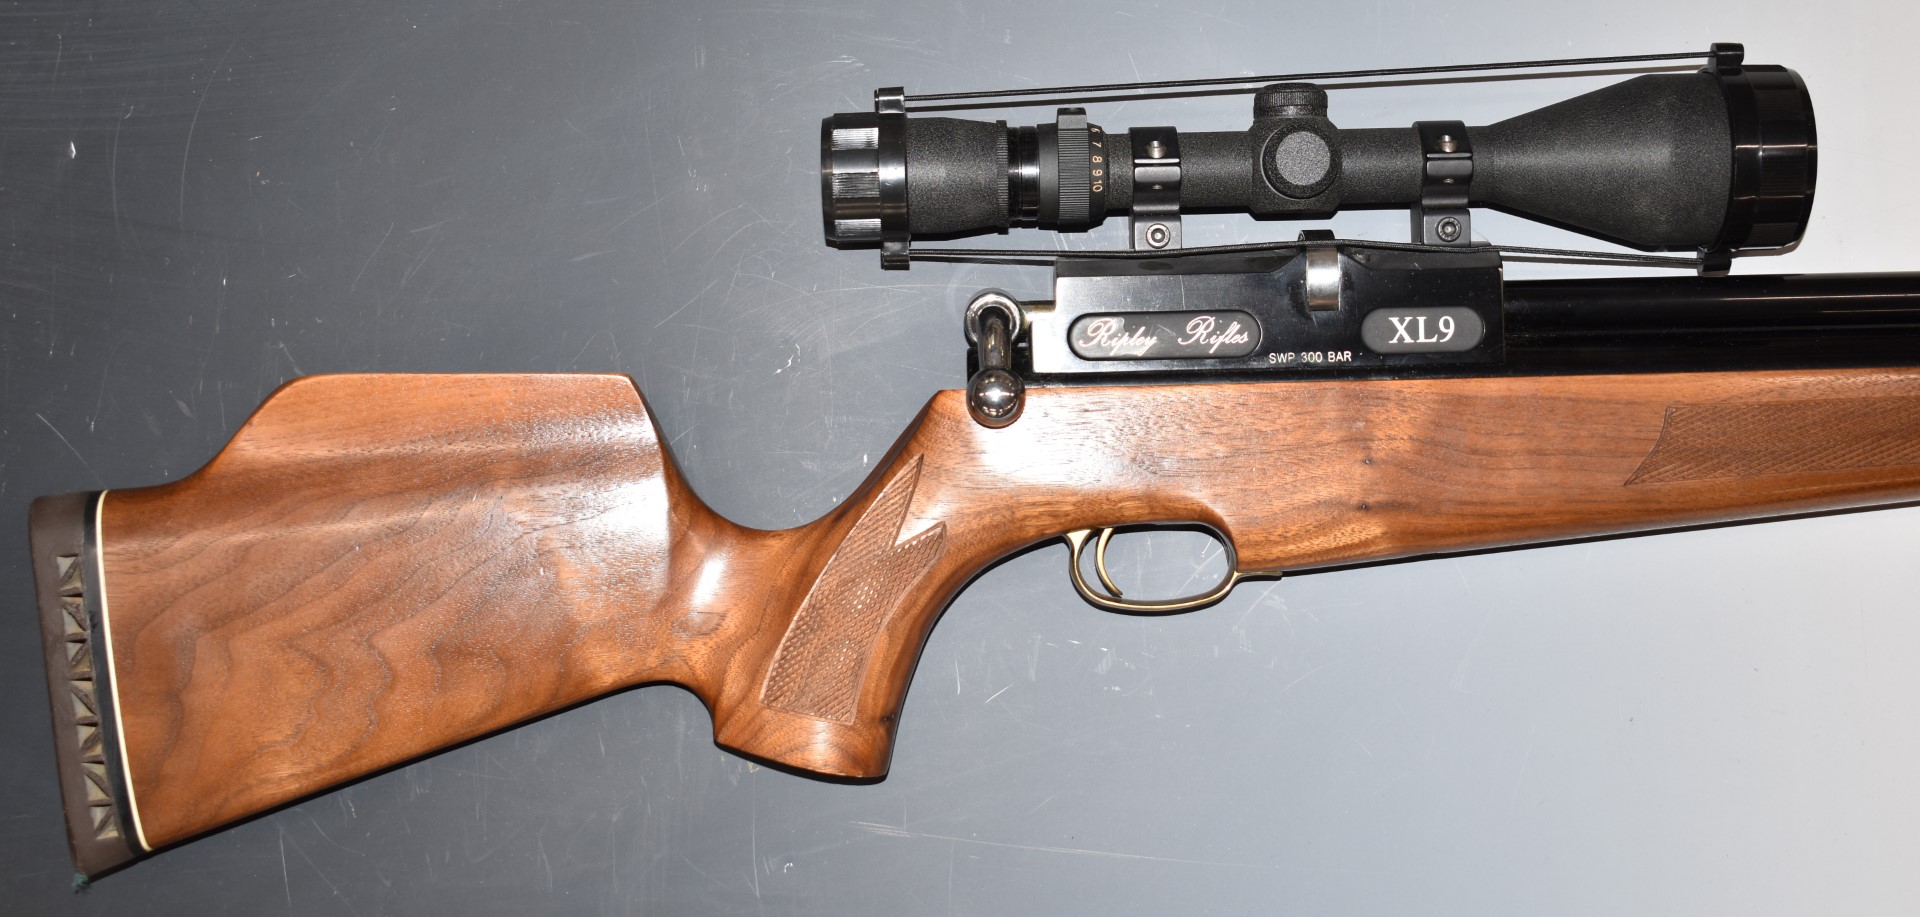 Ripley Rifles XL9 .22 PCP air rifle with nine shot magazine, chequered semi-pistol grip and - Image 3 of 10